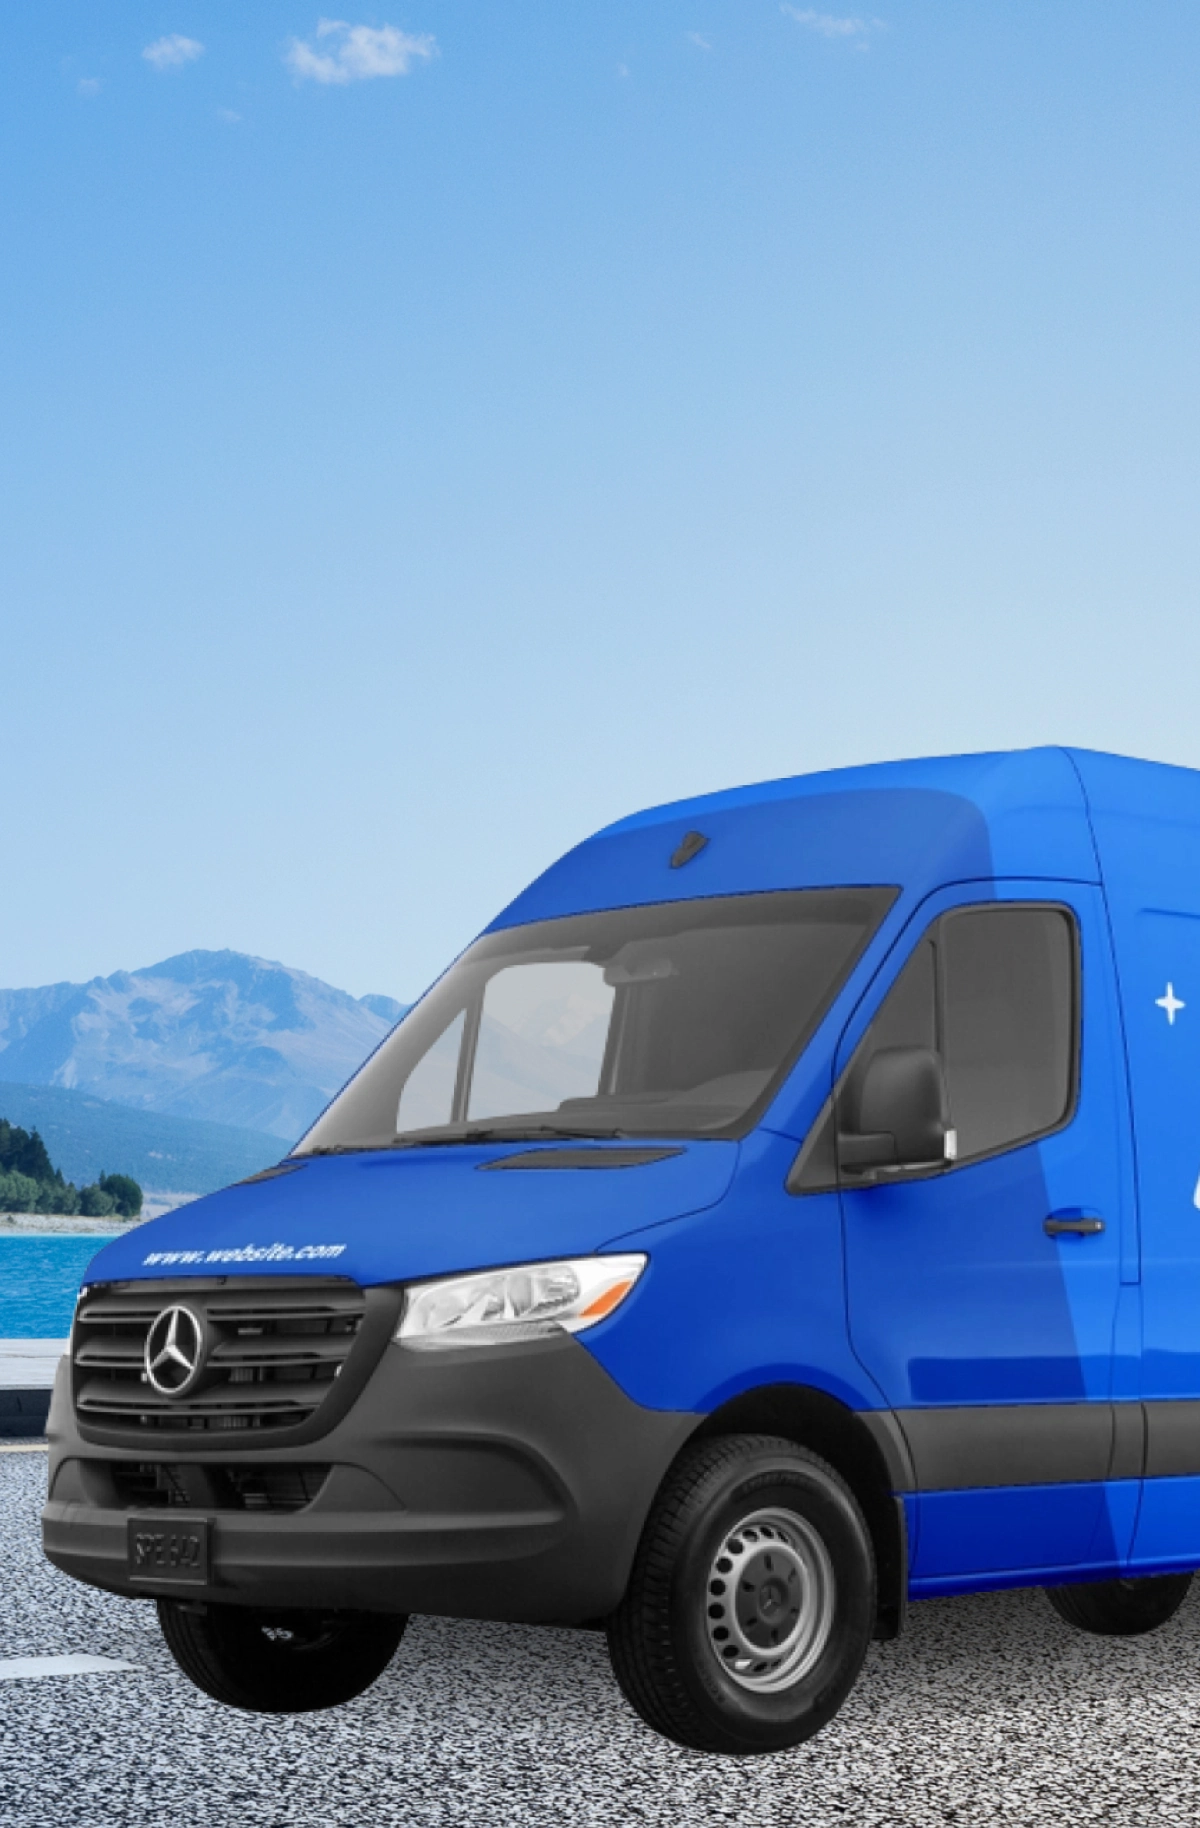 Image of a blue wrapped van on an open road